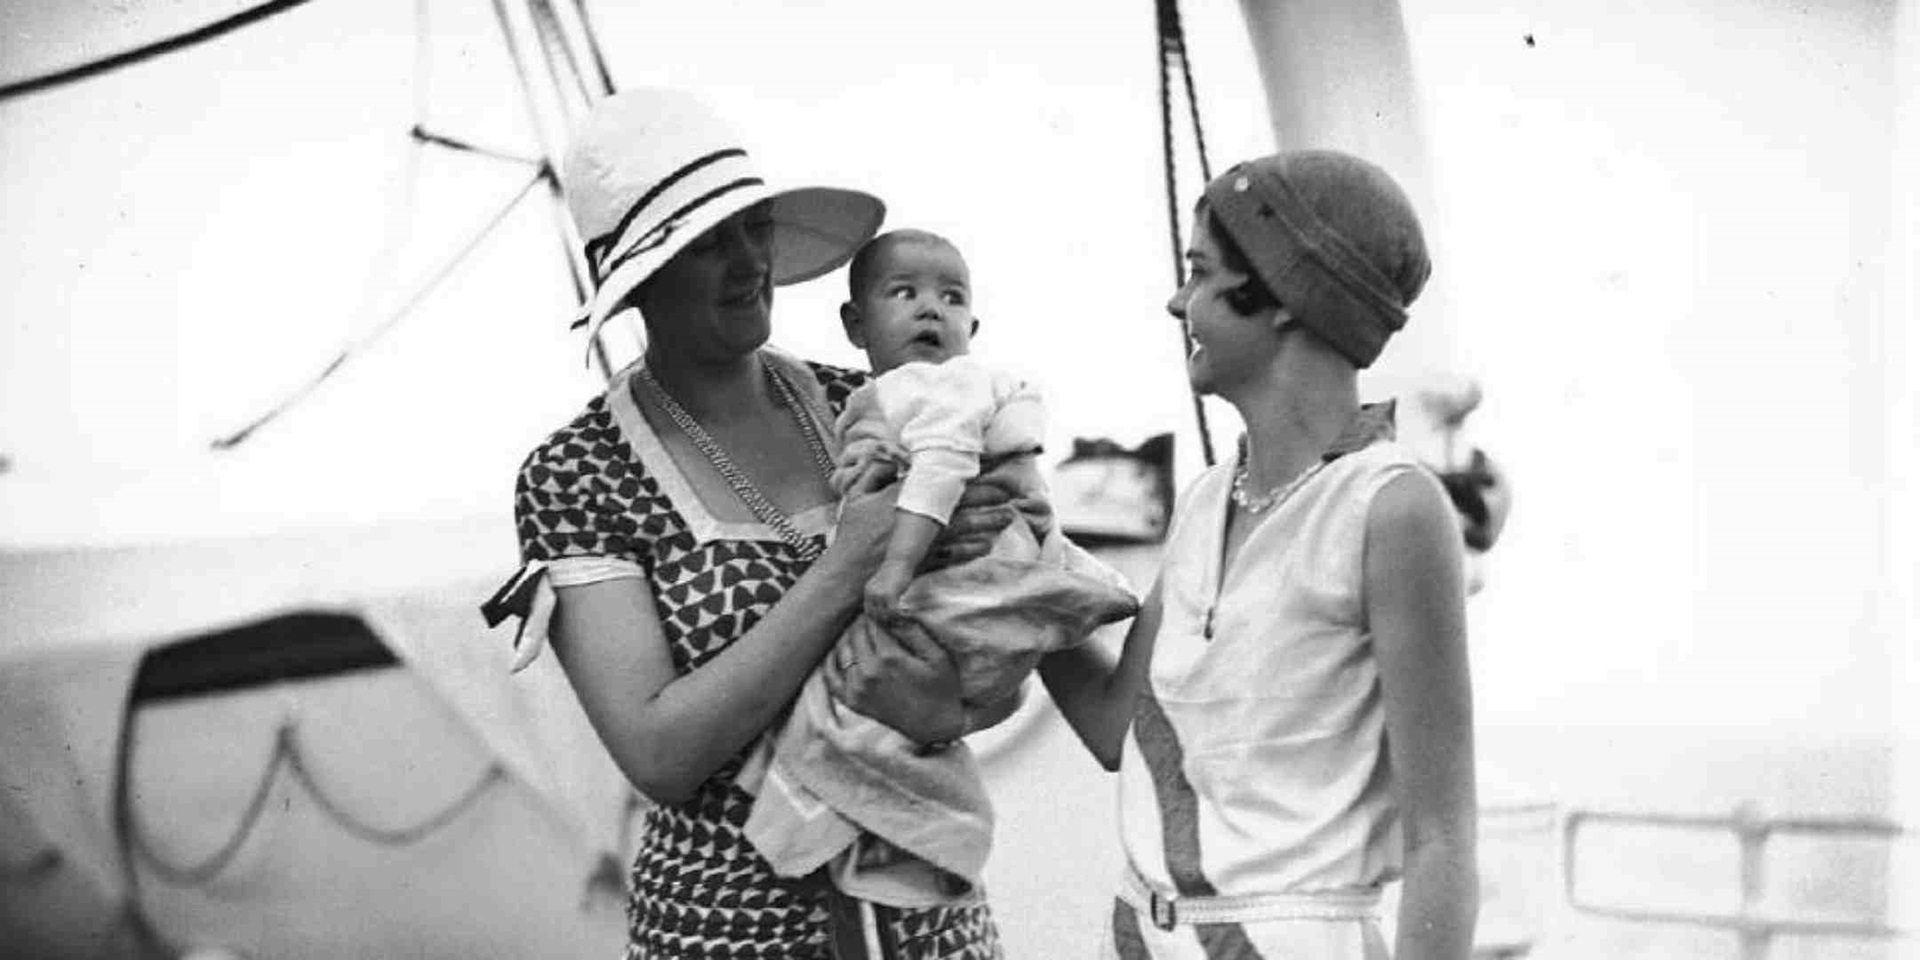 Two women and a baby. Photo: Samuel J Hood. ANMMCollection 00034602